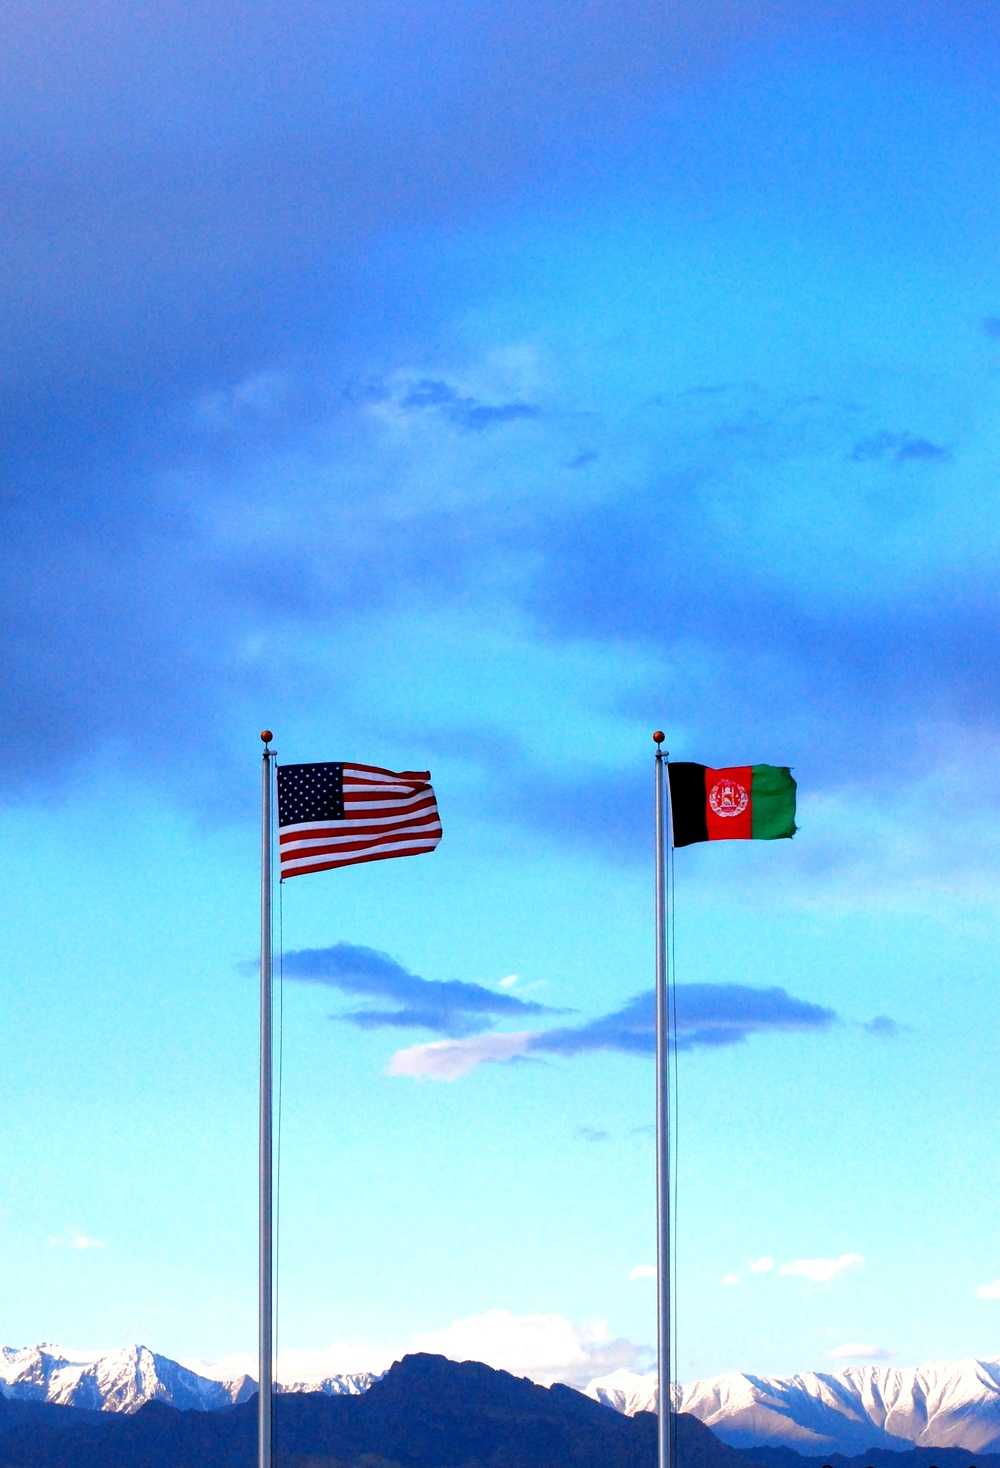 Afghan and American Flags Together